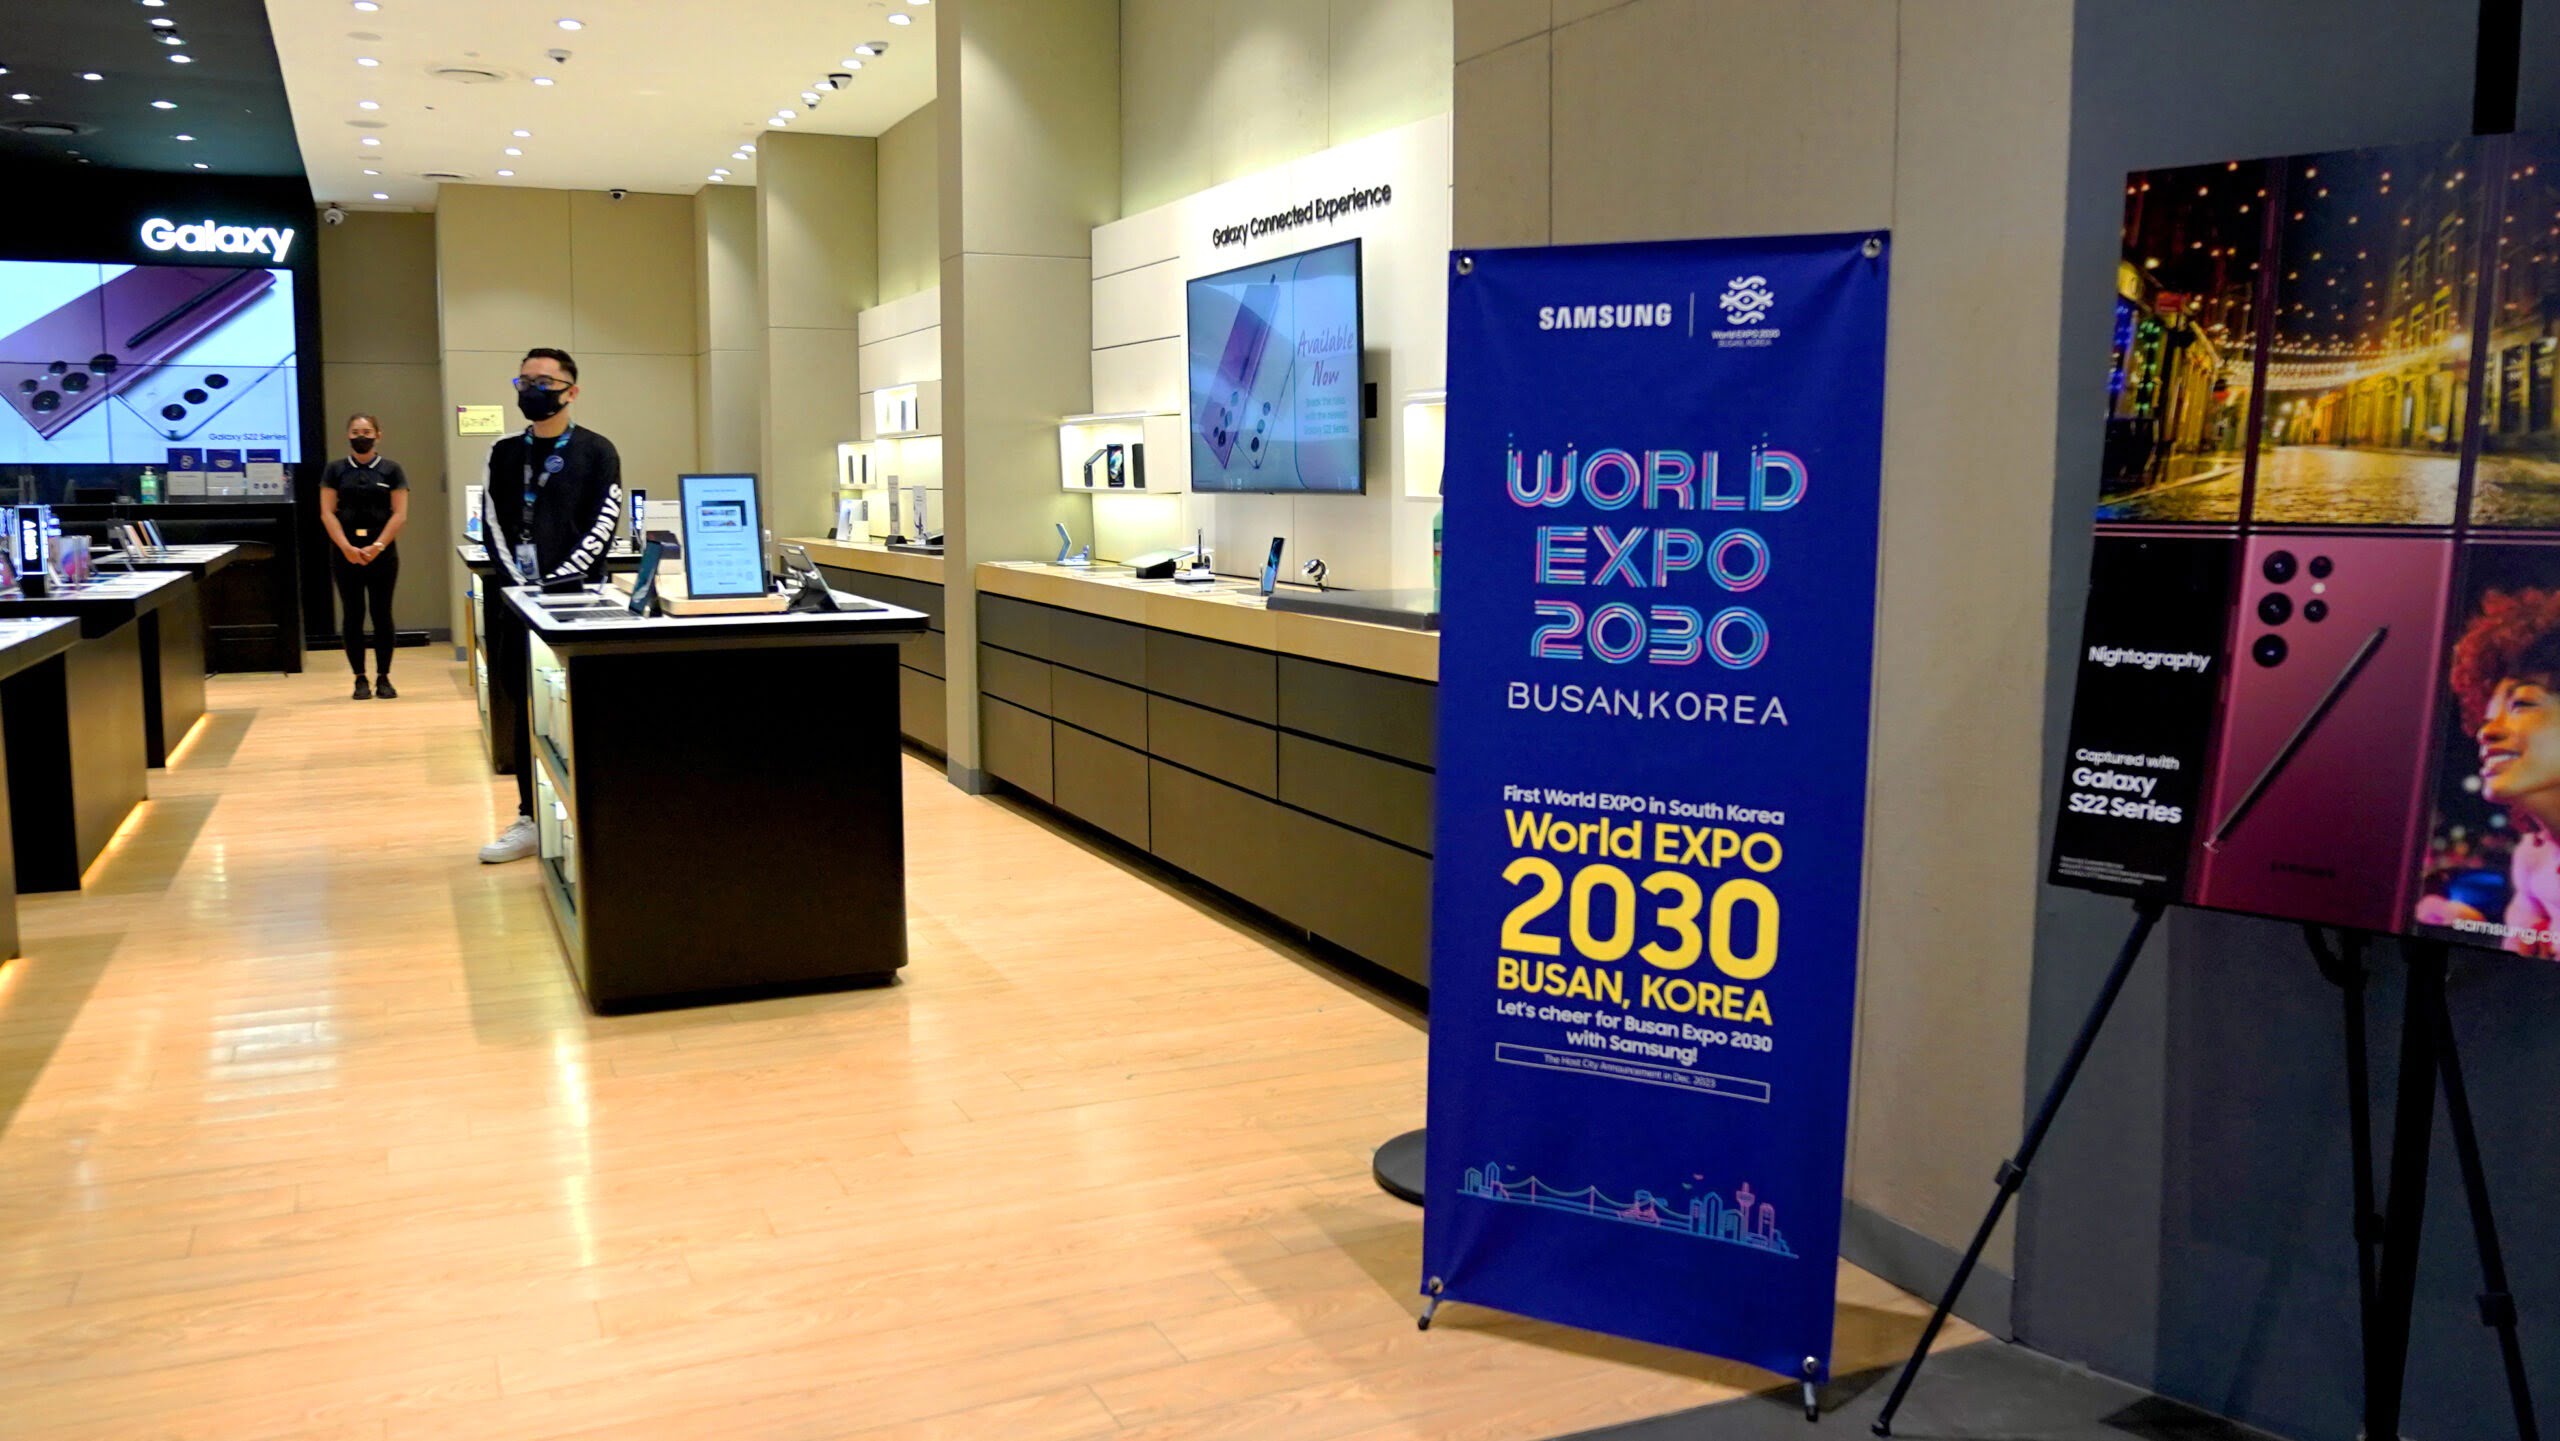 Samsung Philippines supports Korea’s bid for the World Expo 2030 The